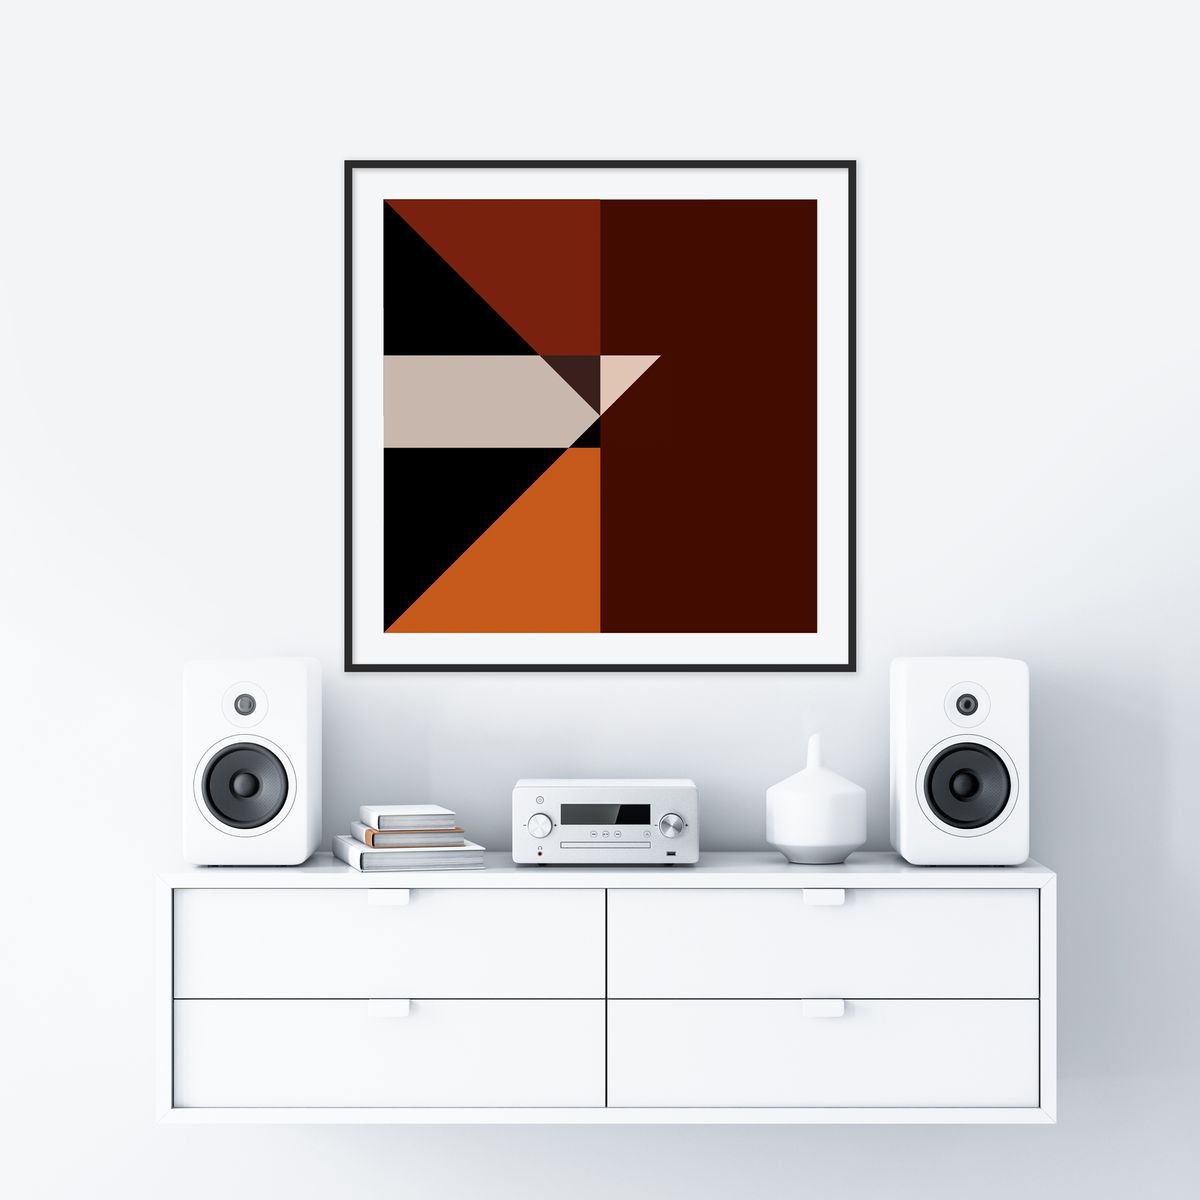 Crisp Triangle Abstract In Shades Of Brown and Orange by Michael  Hunter BA (Hons)